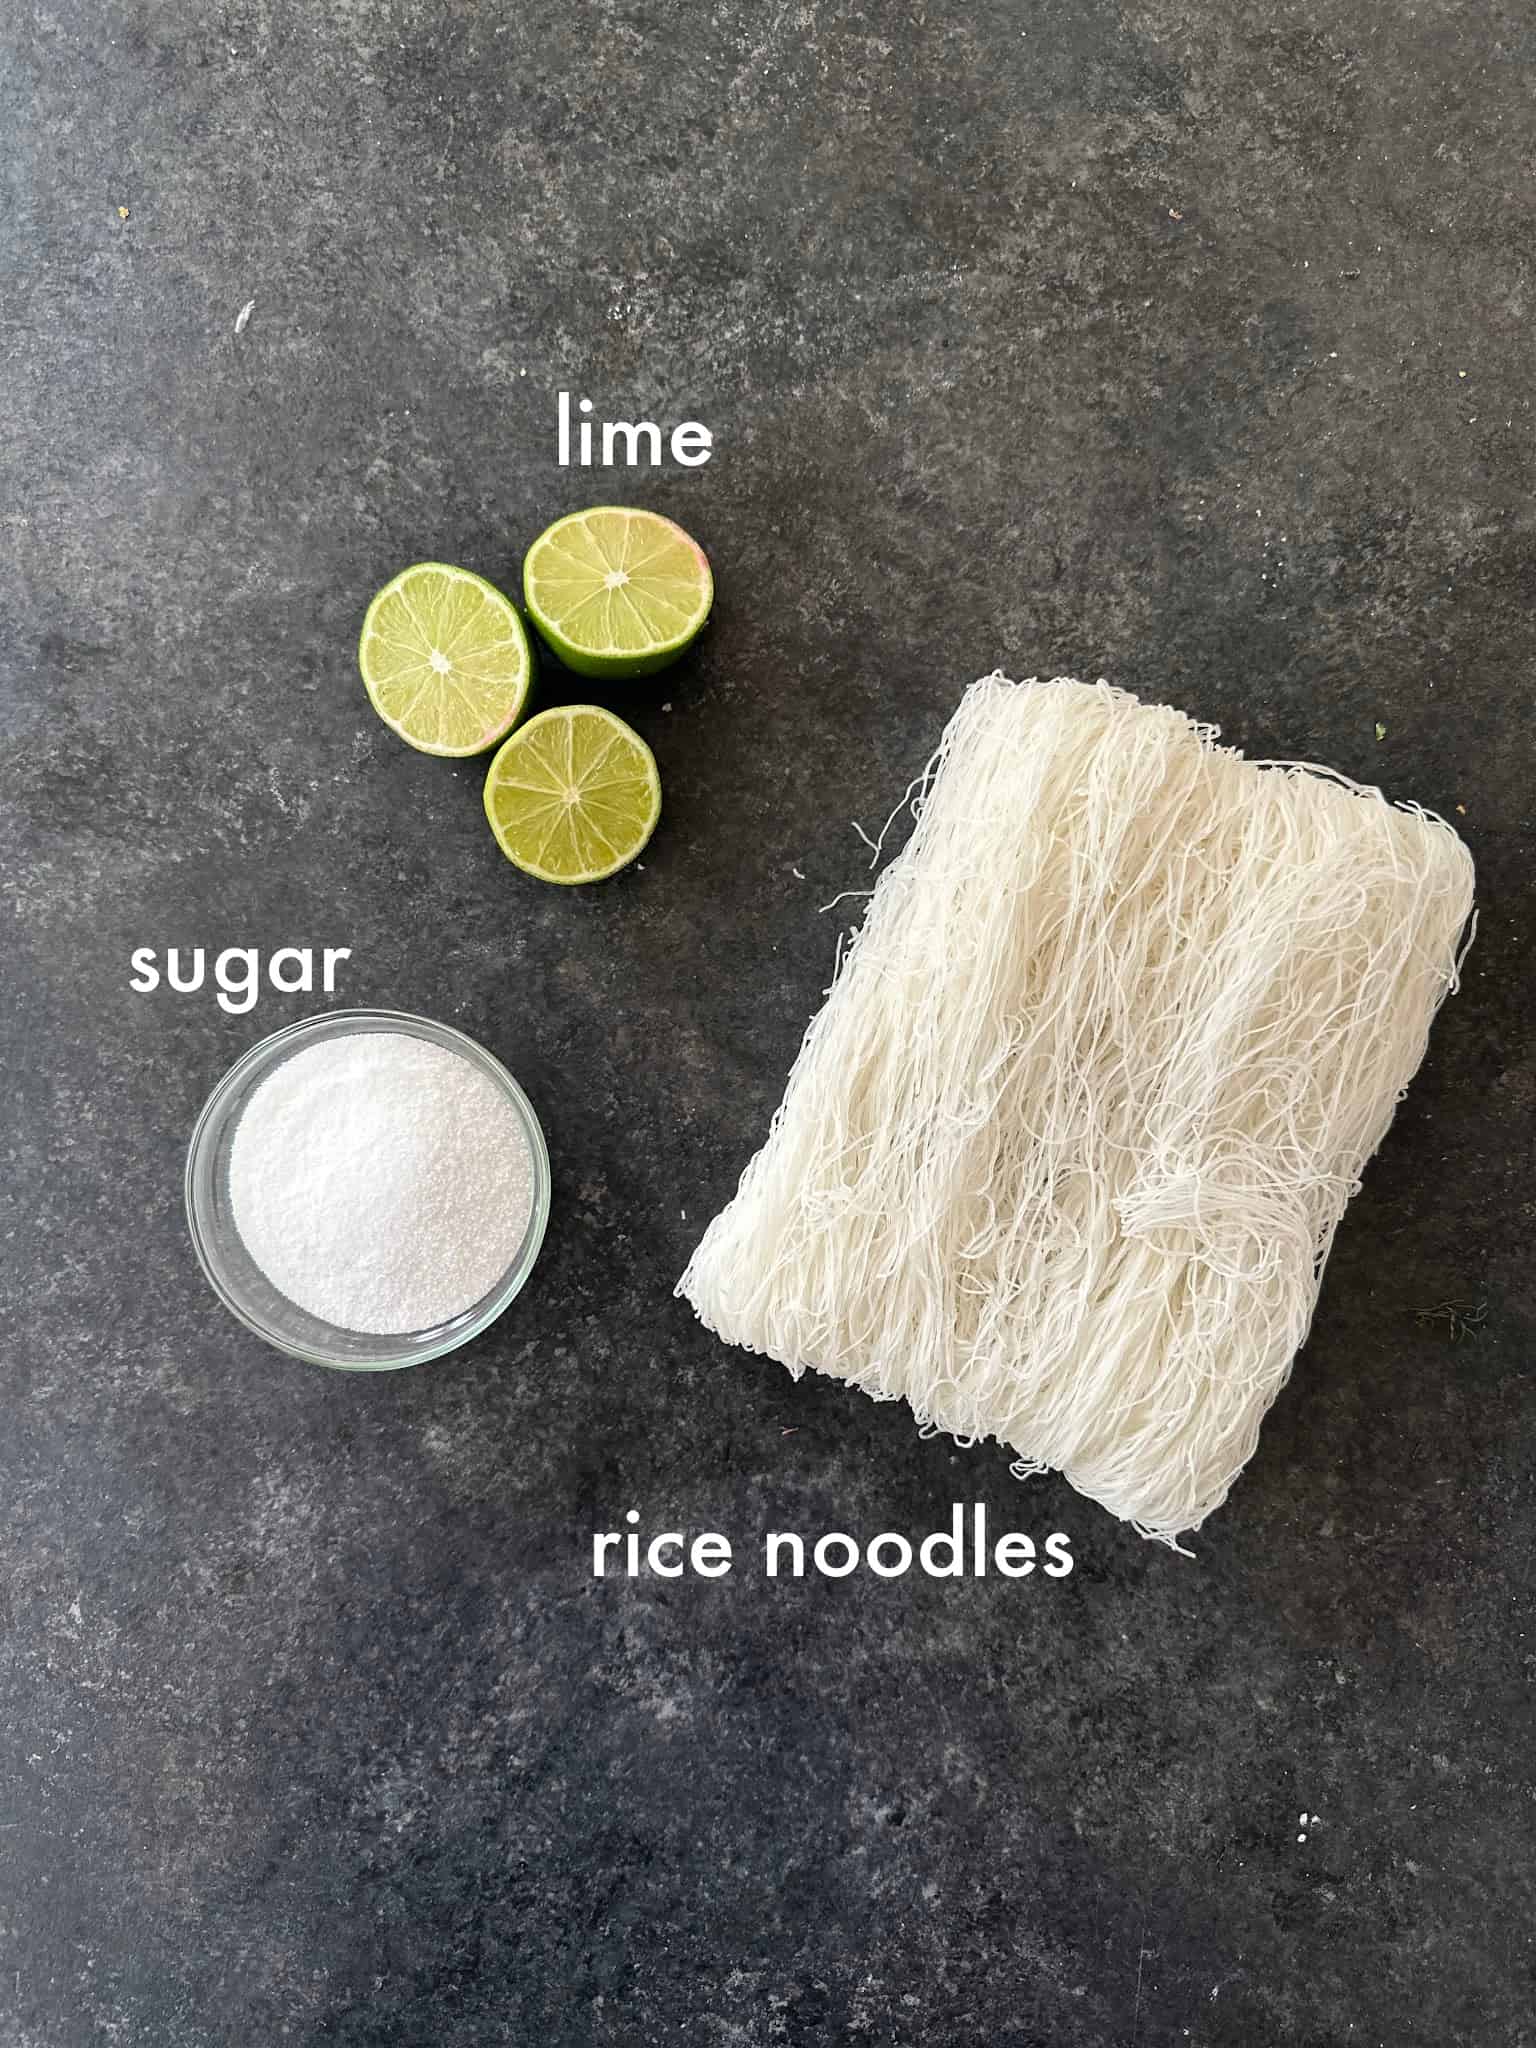 To Make this ecipe you need rice vermicelli, sugar and lime. 